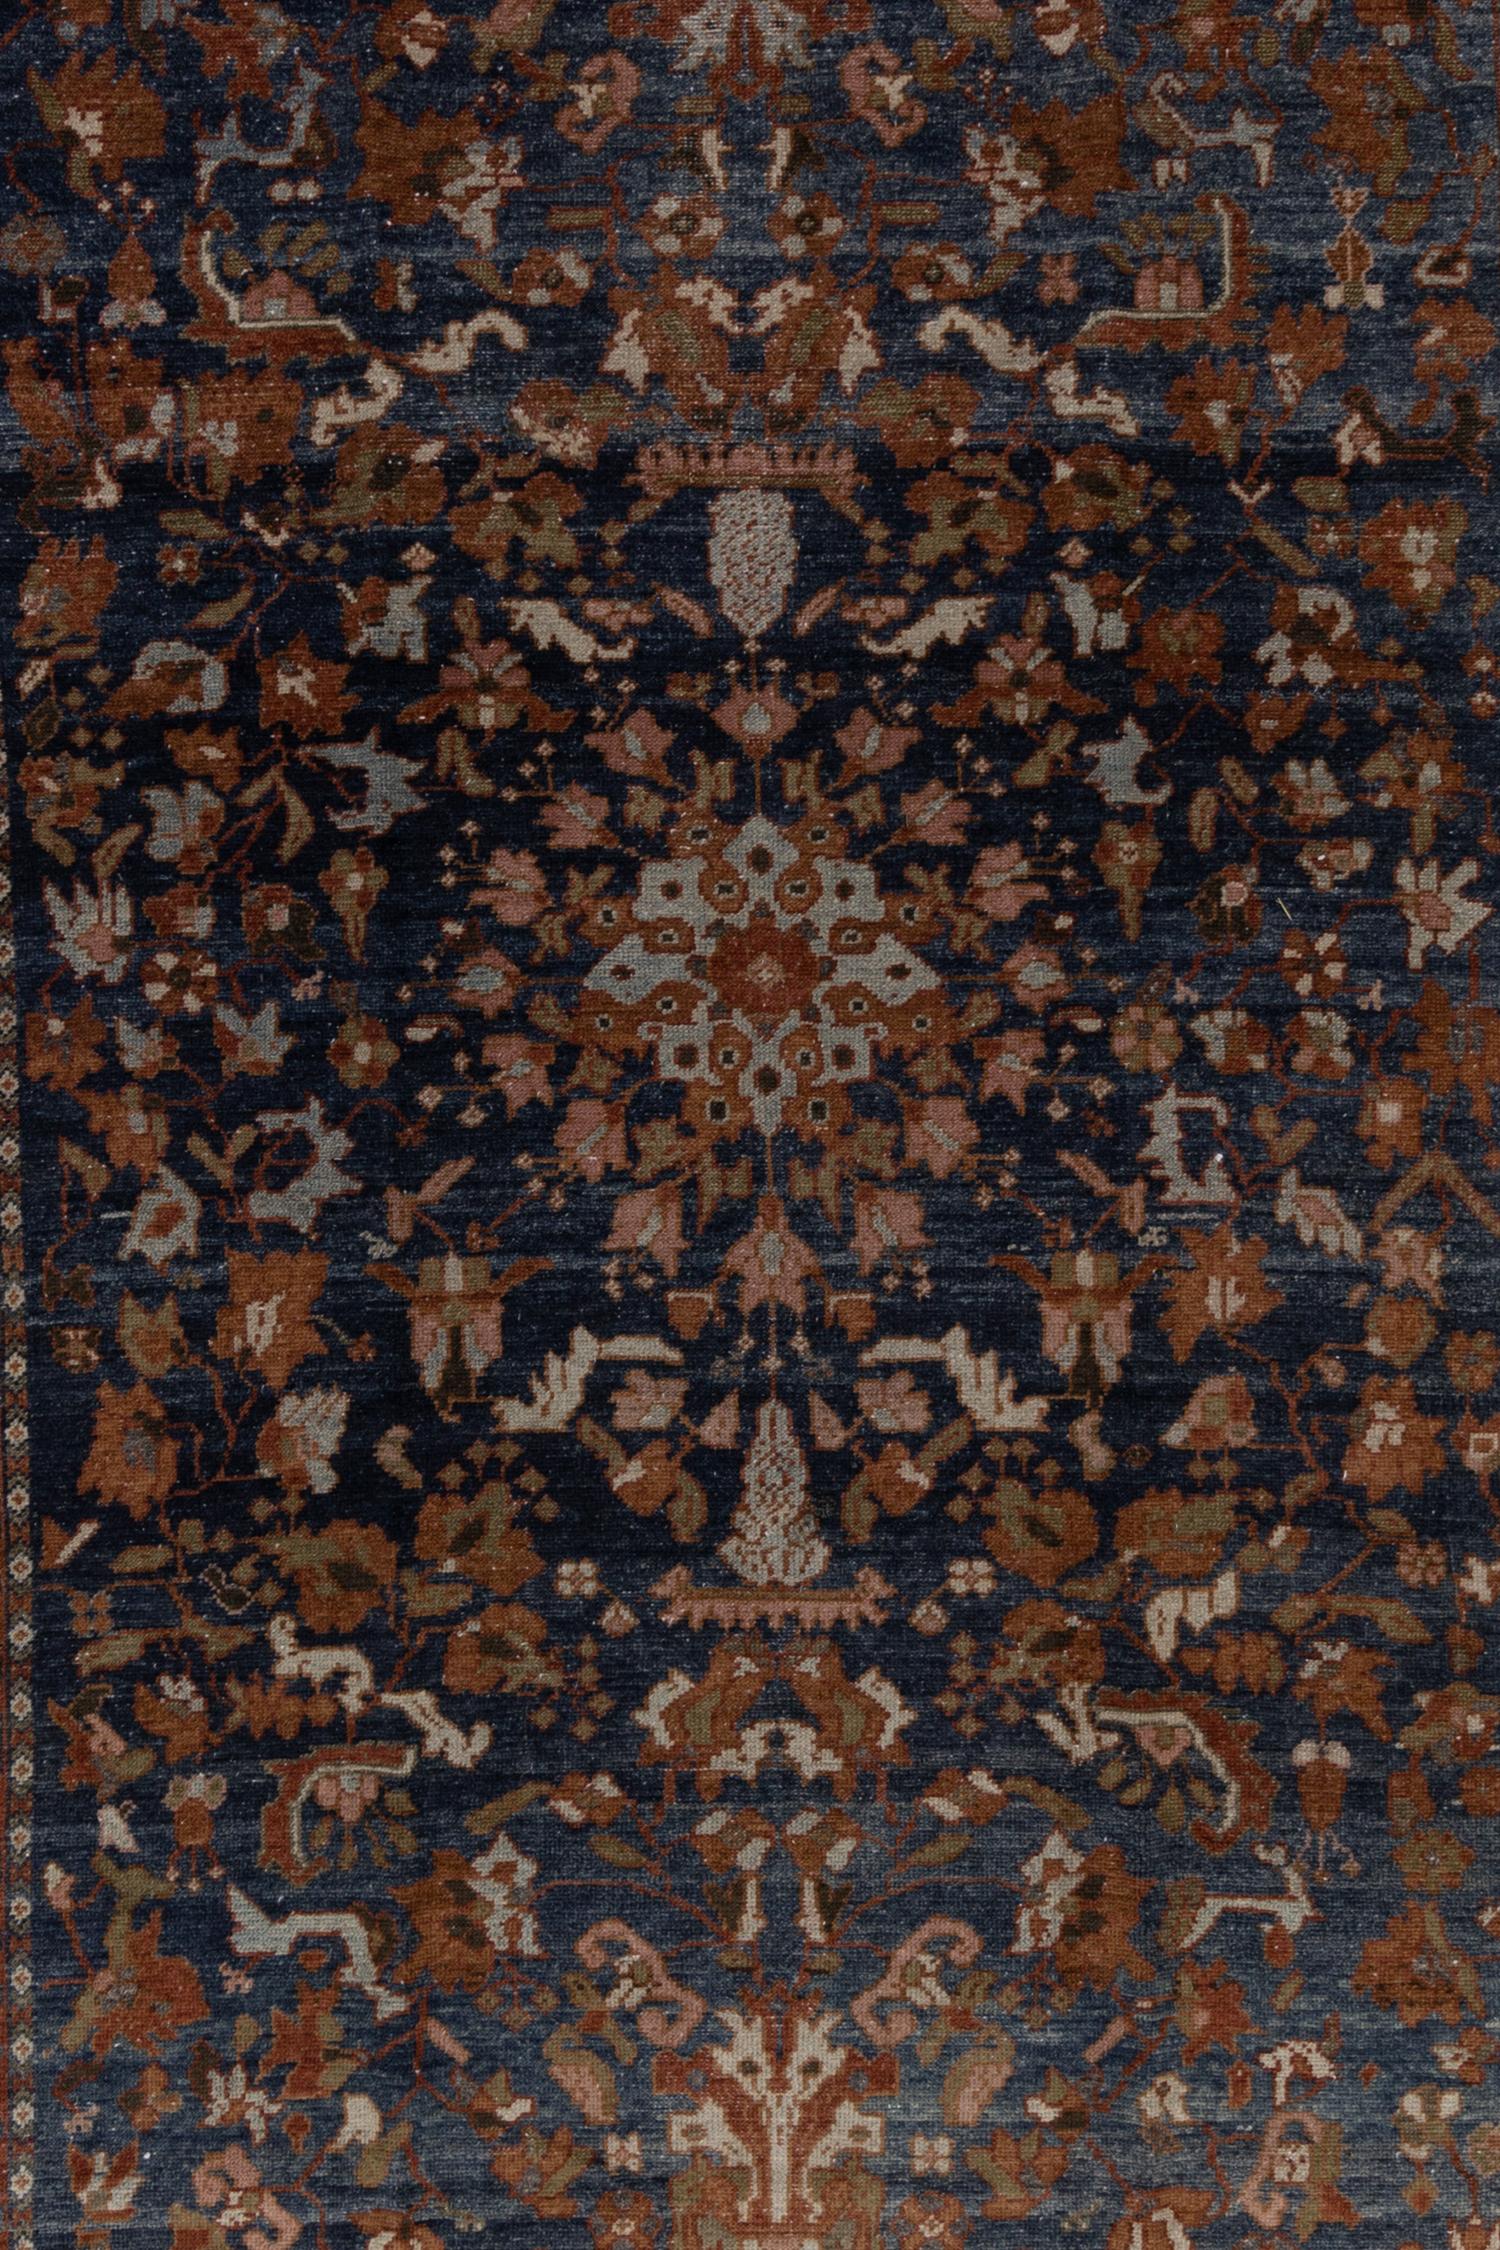 Deep blue with abrash, well detailed with an interested motif of foliage bursting in bloom. Excellent condition with a soft pile. 

Wear Guide: 1

Wear Notes: 
Vintage and antique rugs are by nature, pre-loved and may show evidence of their